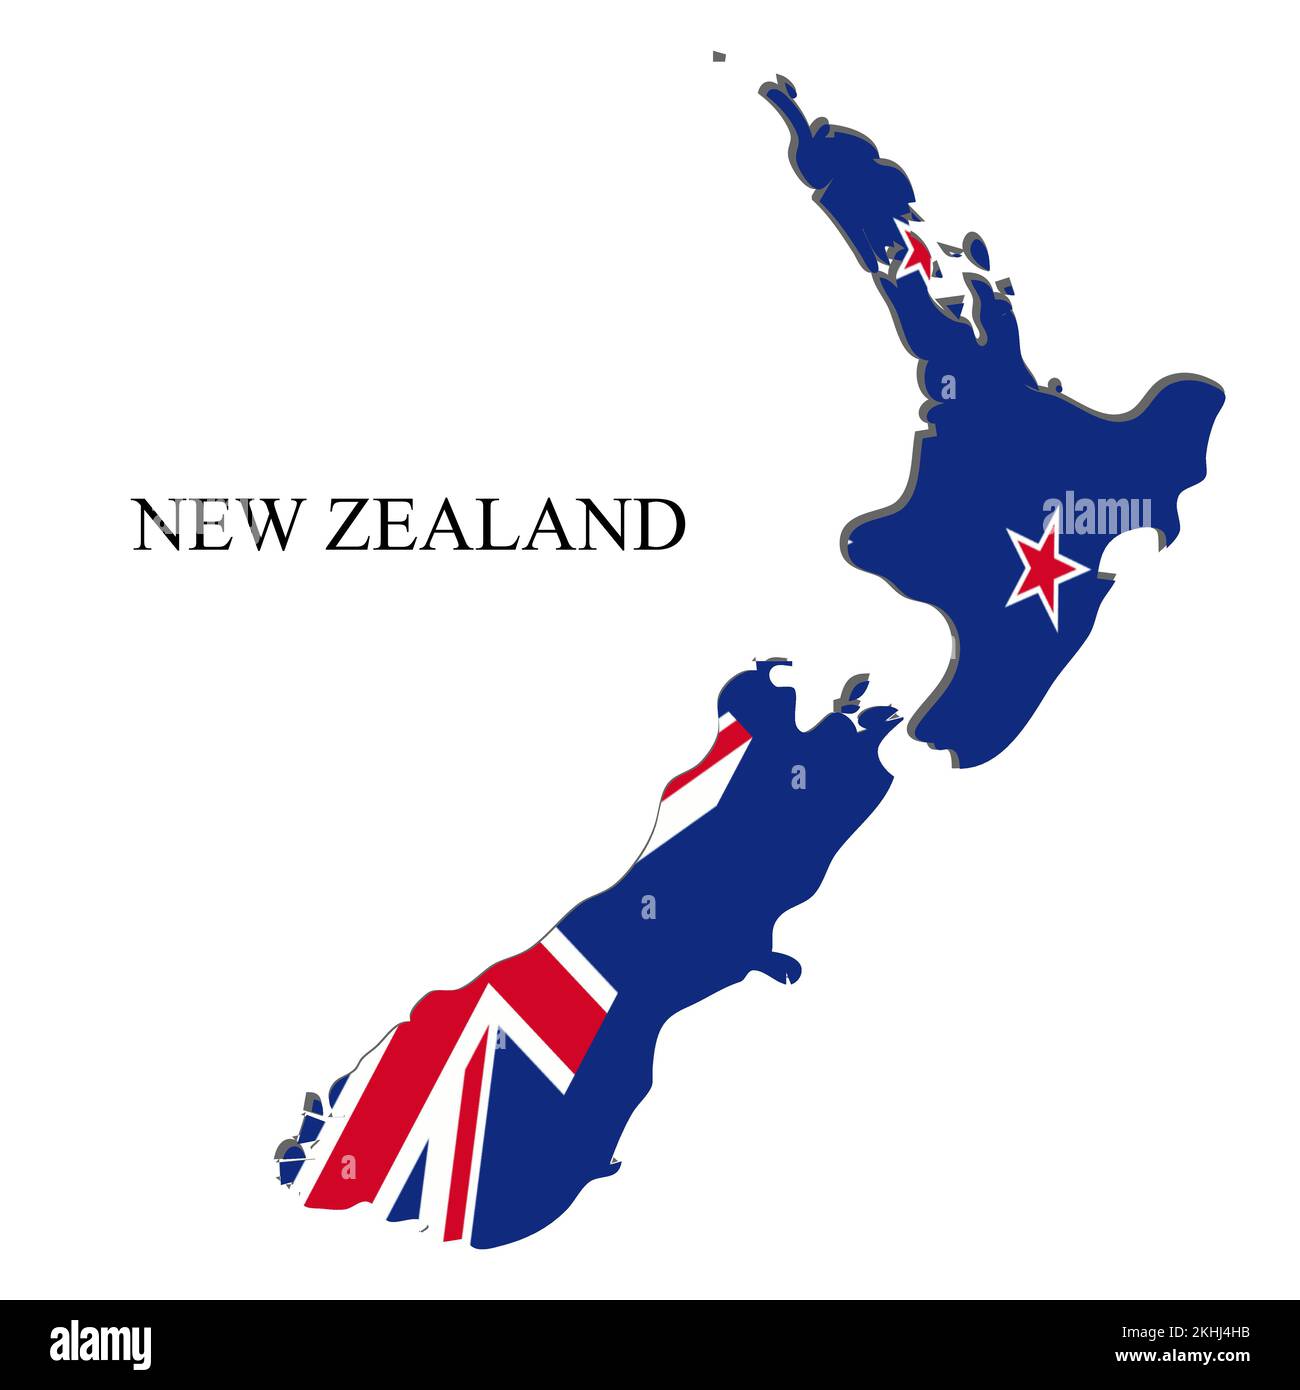 New Zealand map vector illustration. Global economy. Famous country. Oceania region Stock Vector